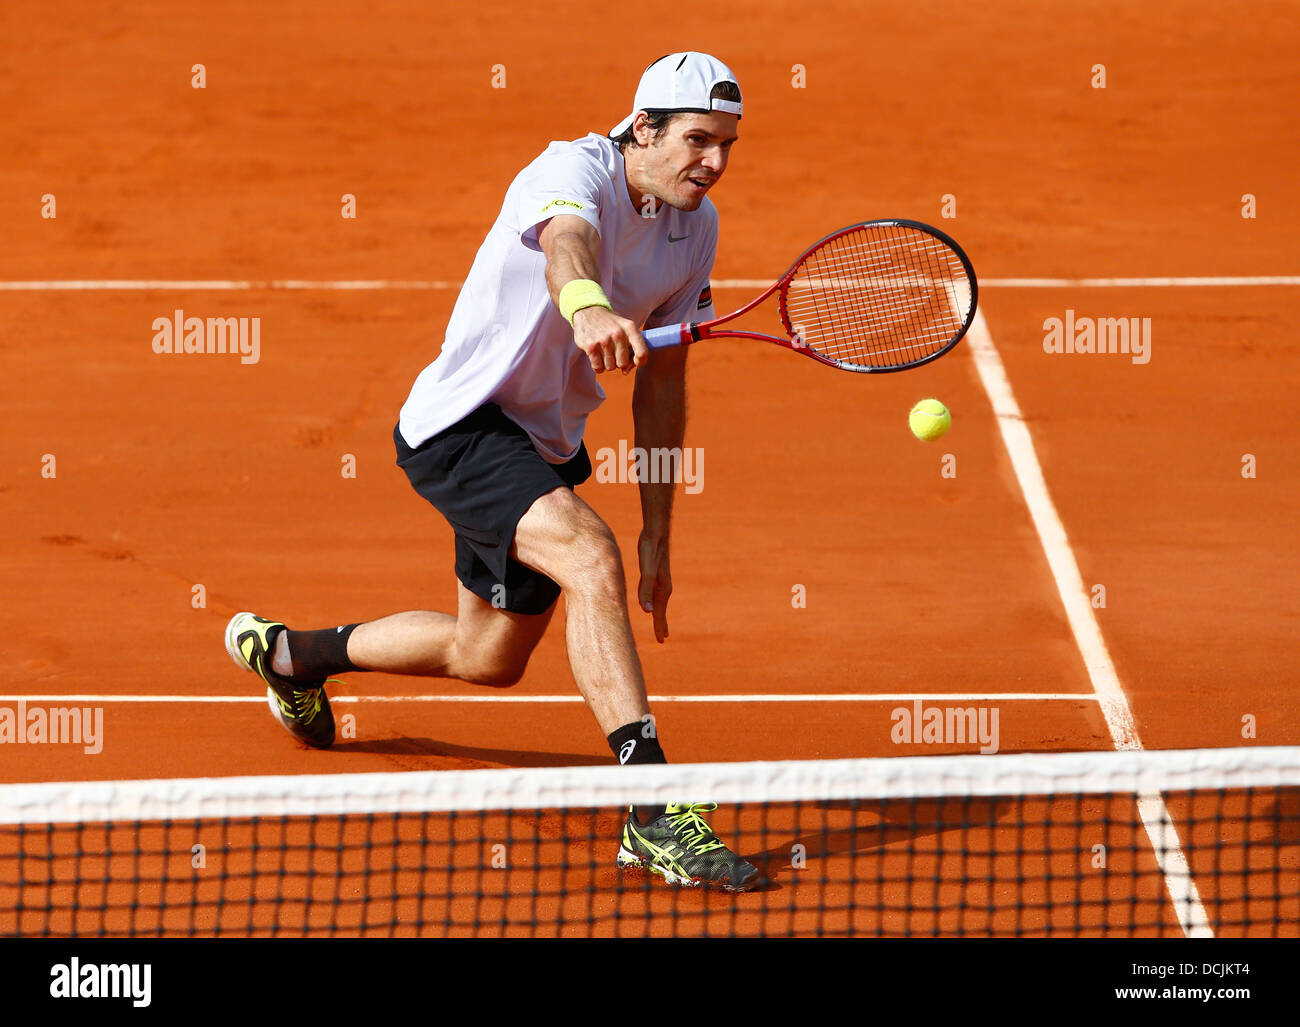 Tommy Haas (GER) in azione all'aperto francese 2013 Foto Stock